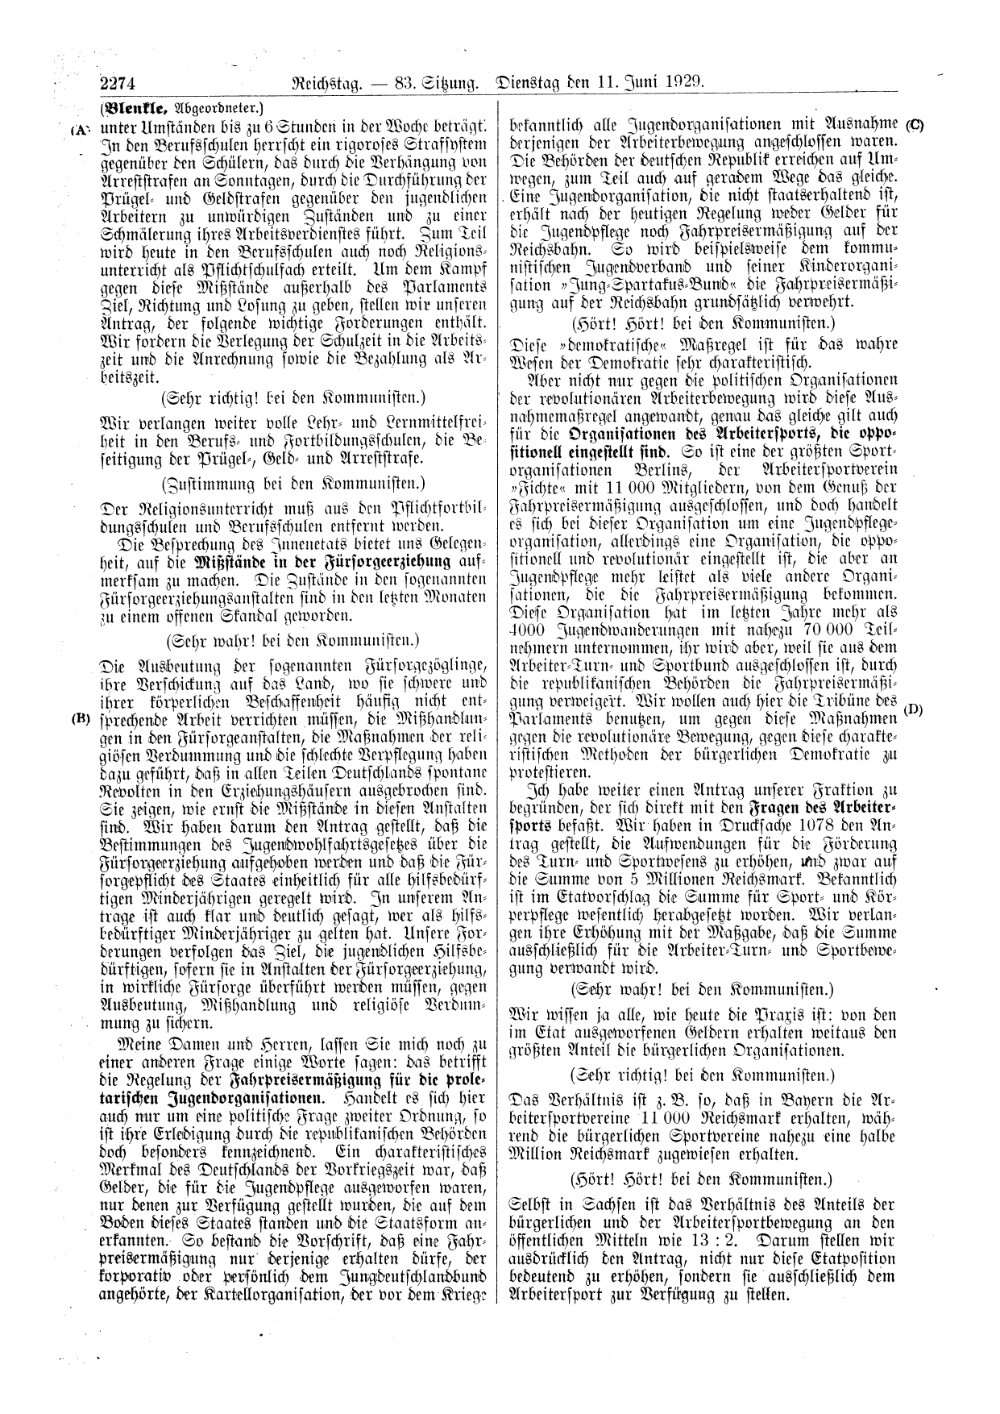 Scan of page 2274